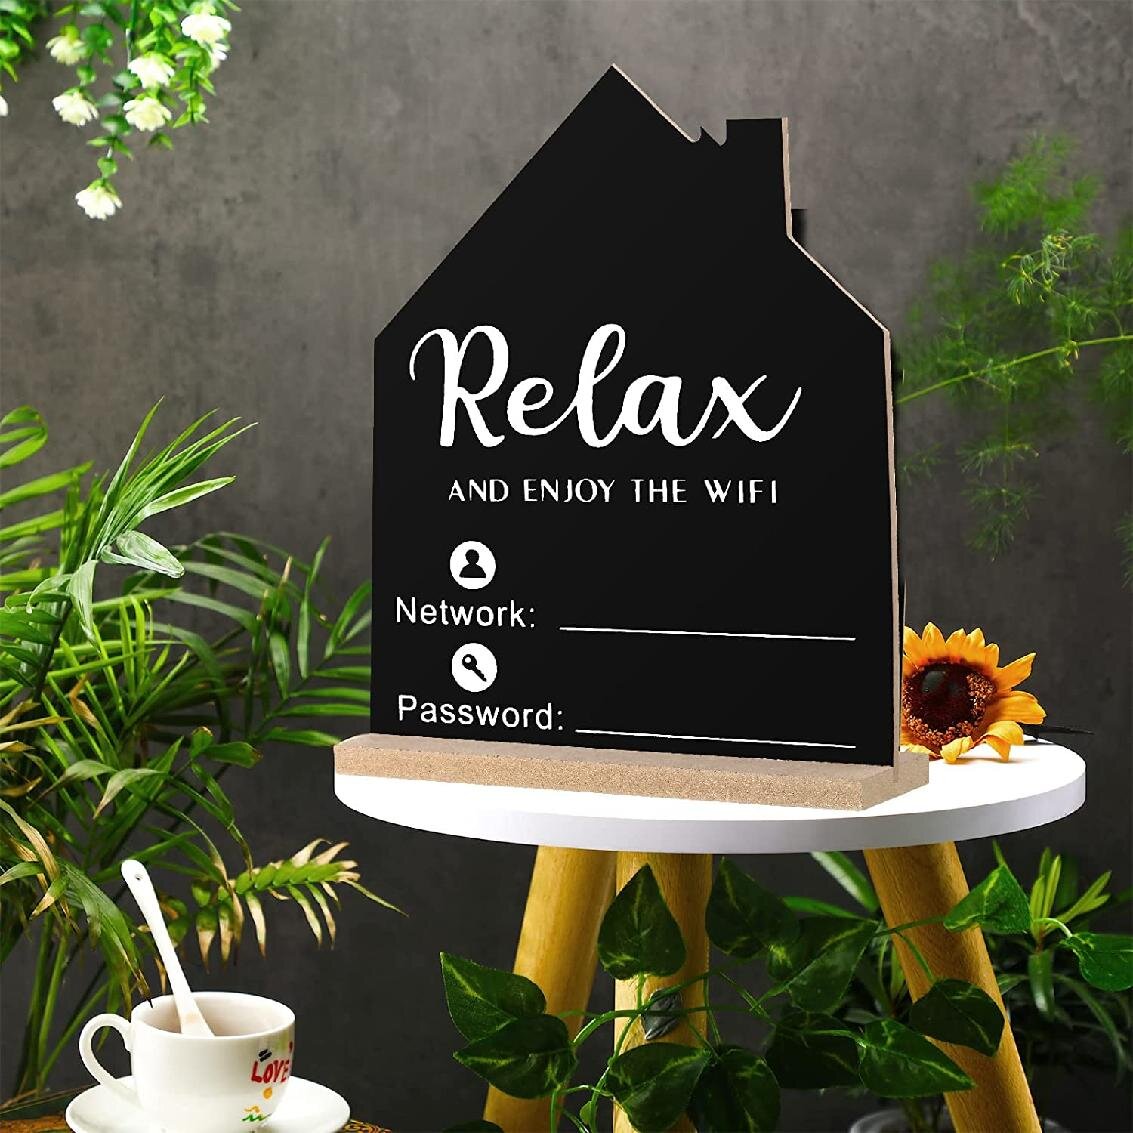 WiFi Password Sign Wooden Table WiFi Sign Wooden Freestanding Sign with Board Erasable Pen Chalkboard Style Freestanding Sign for Home Business Table Centerpieces Decoration Black 